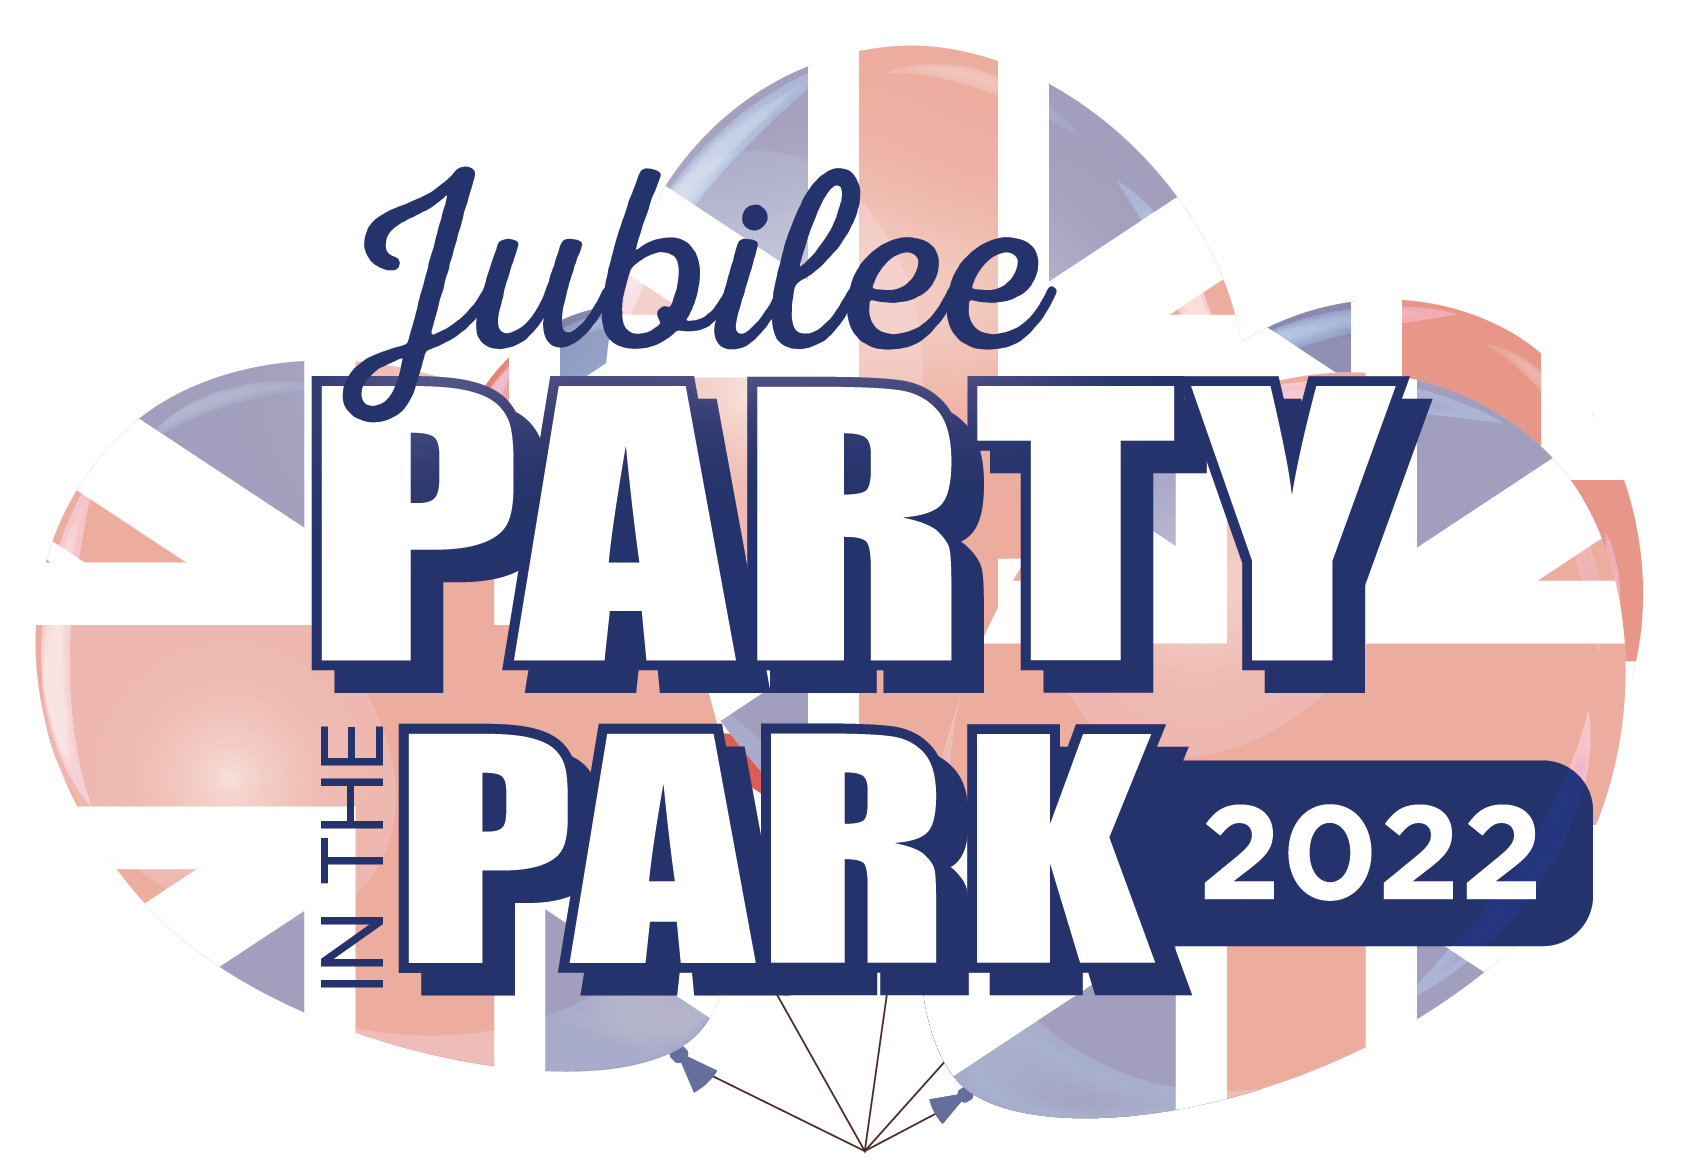 Jubilee Party in the Park 2022